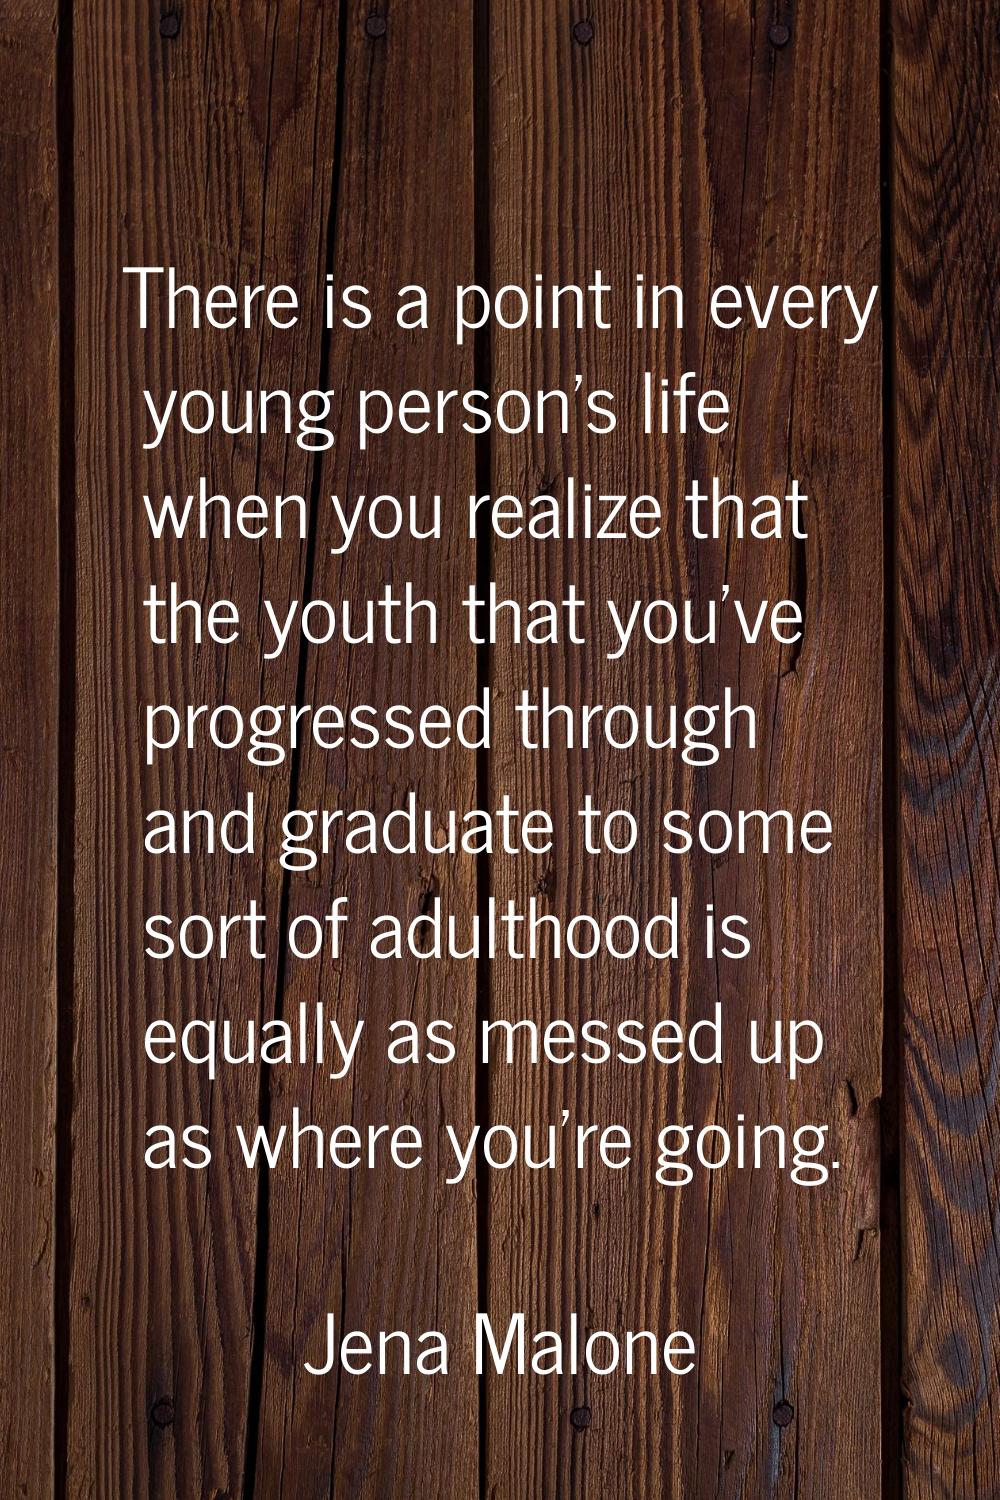 There is a point in every young person's life when you realize that the youth that you've progresse